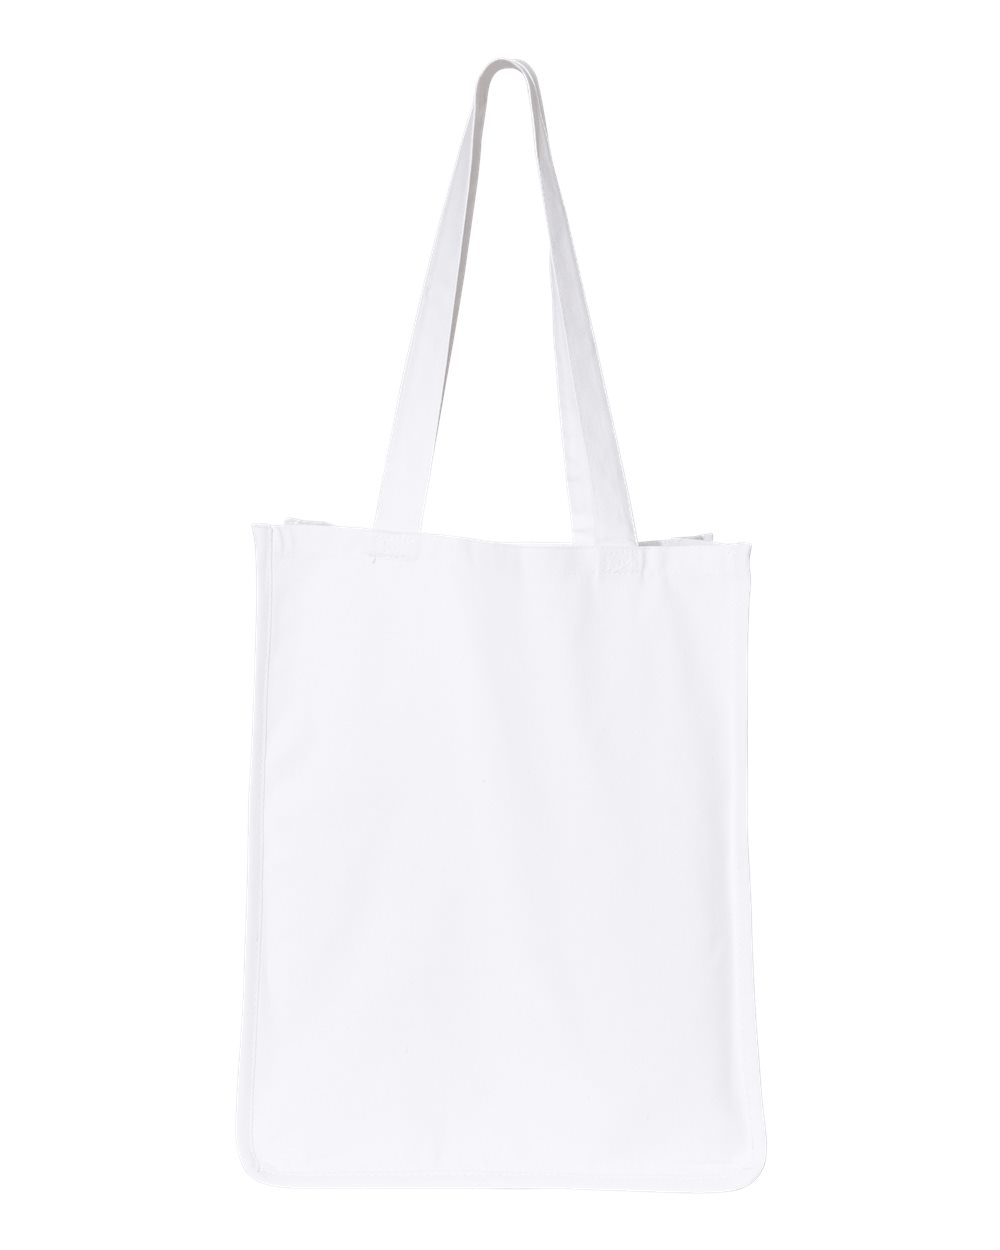 12oz White or Natural 27L Jumbo Shopping Tote Bag - Cotton Creations